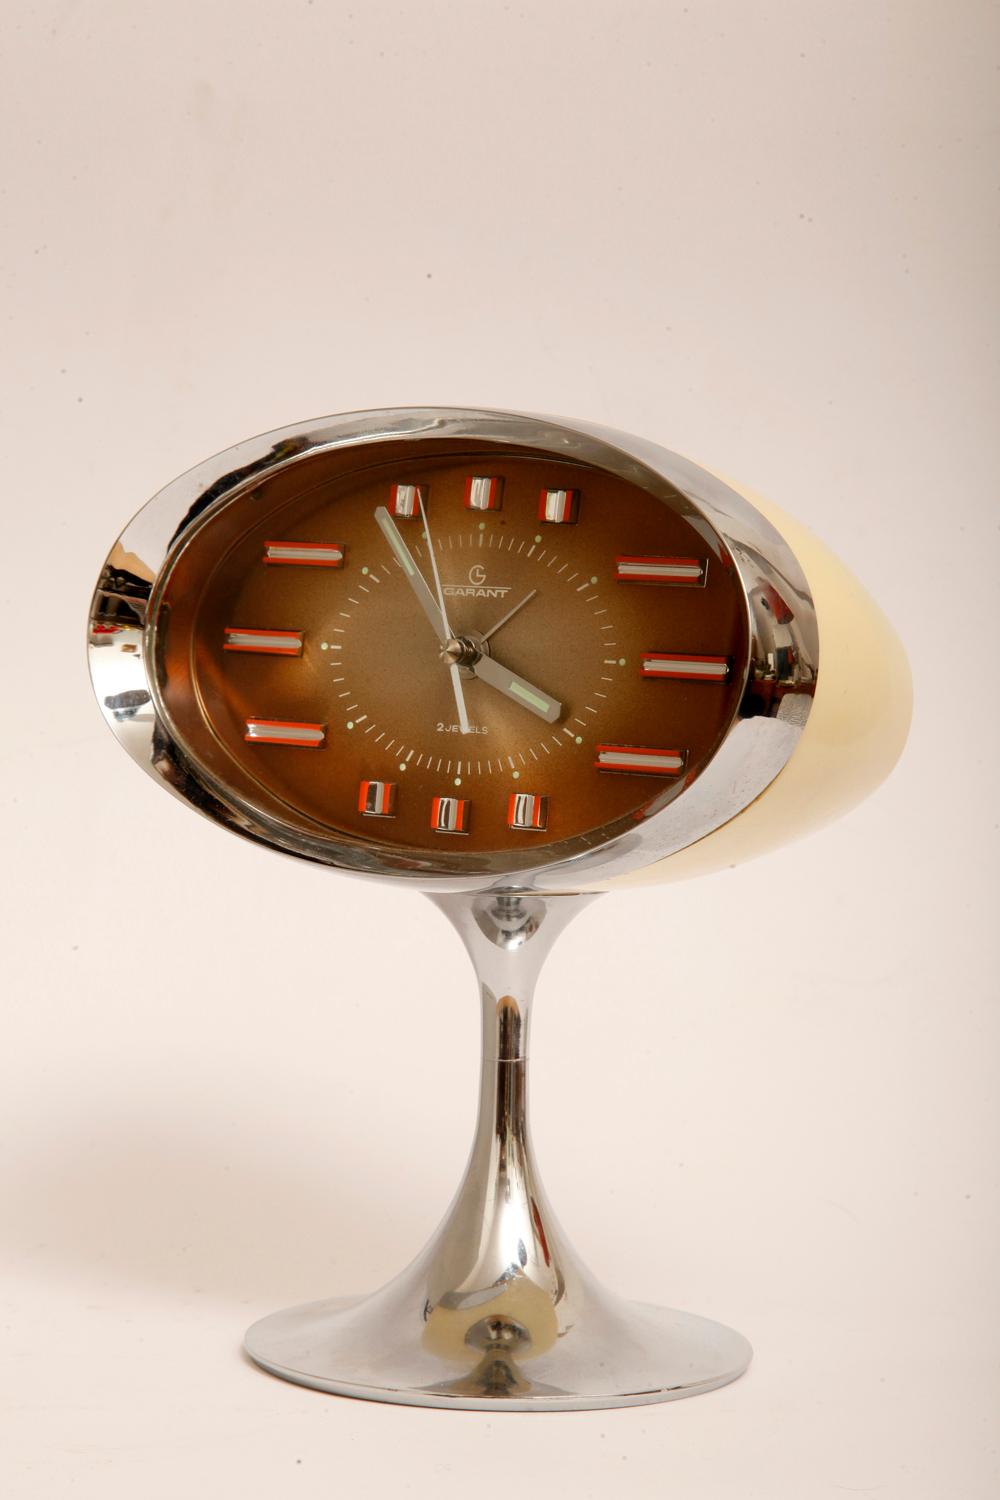 Japanese Space Age Alarm Clock Garant, Plastic and Chromed, 1970s For Sale 7